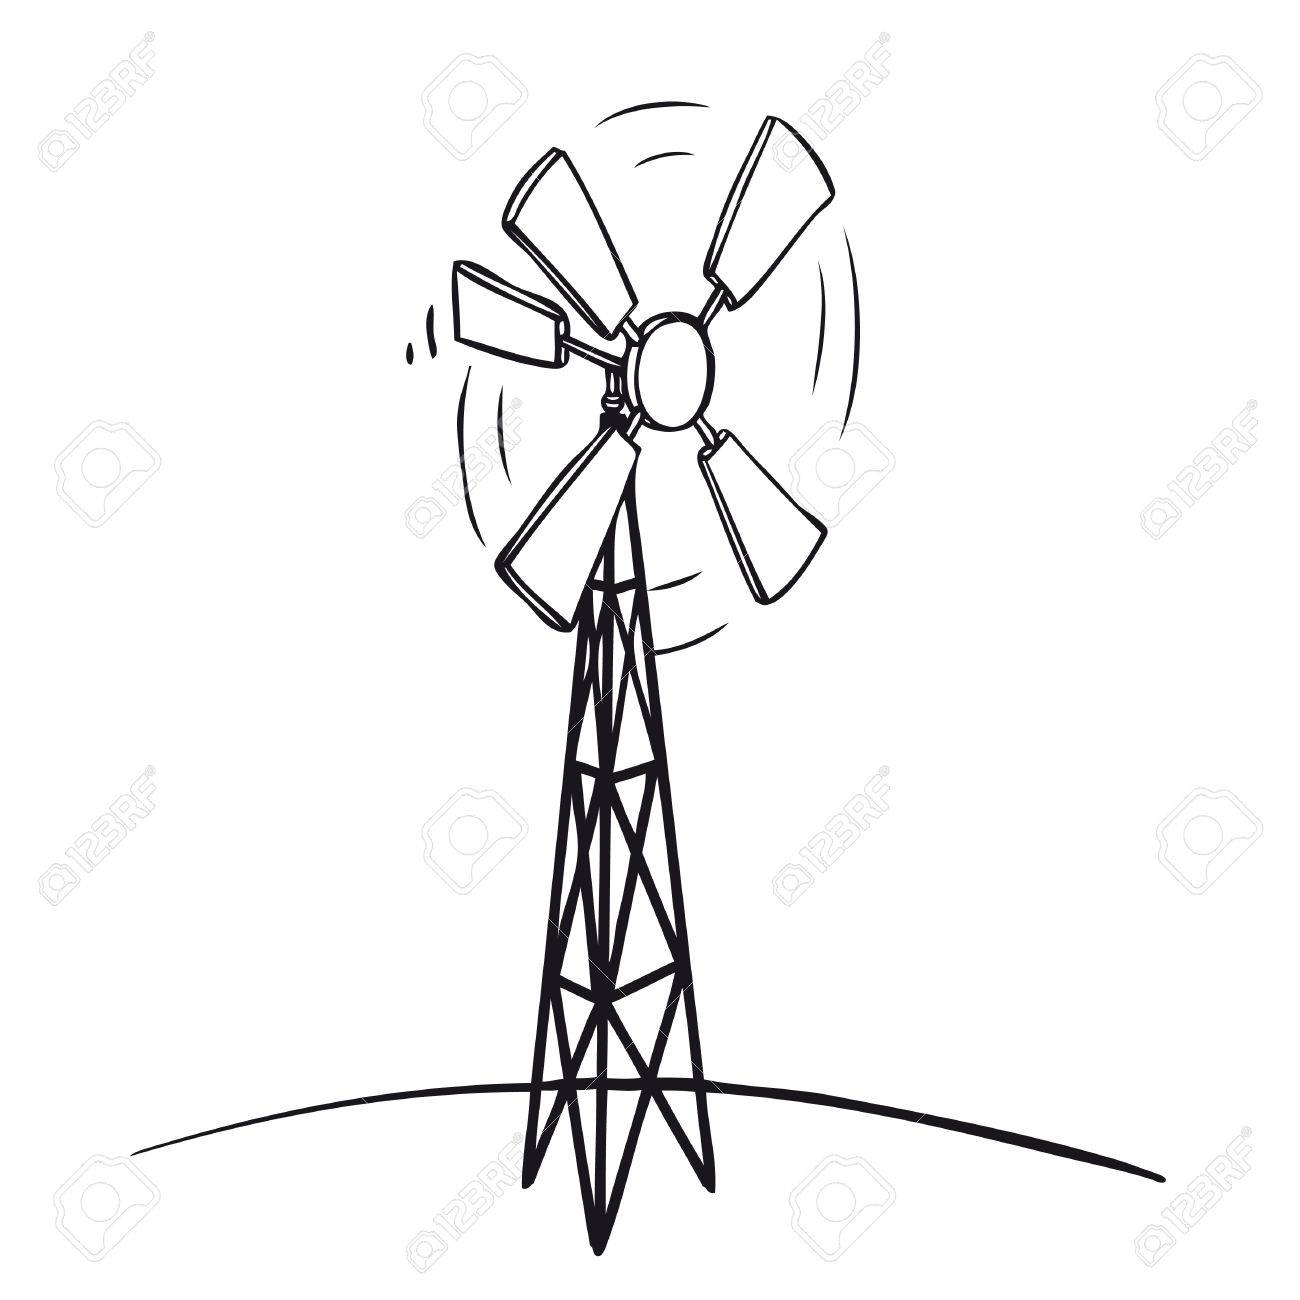 Cape clipart wind. Turbines drawing at getdrawings